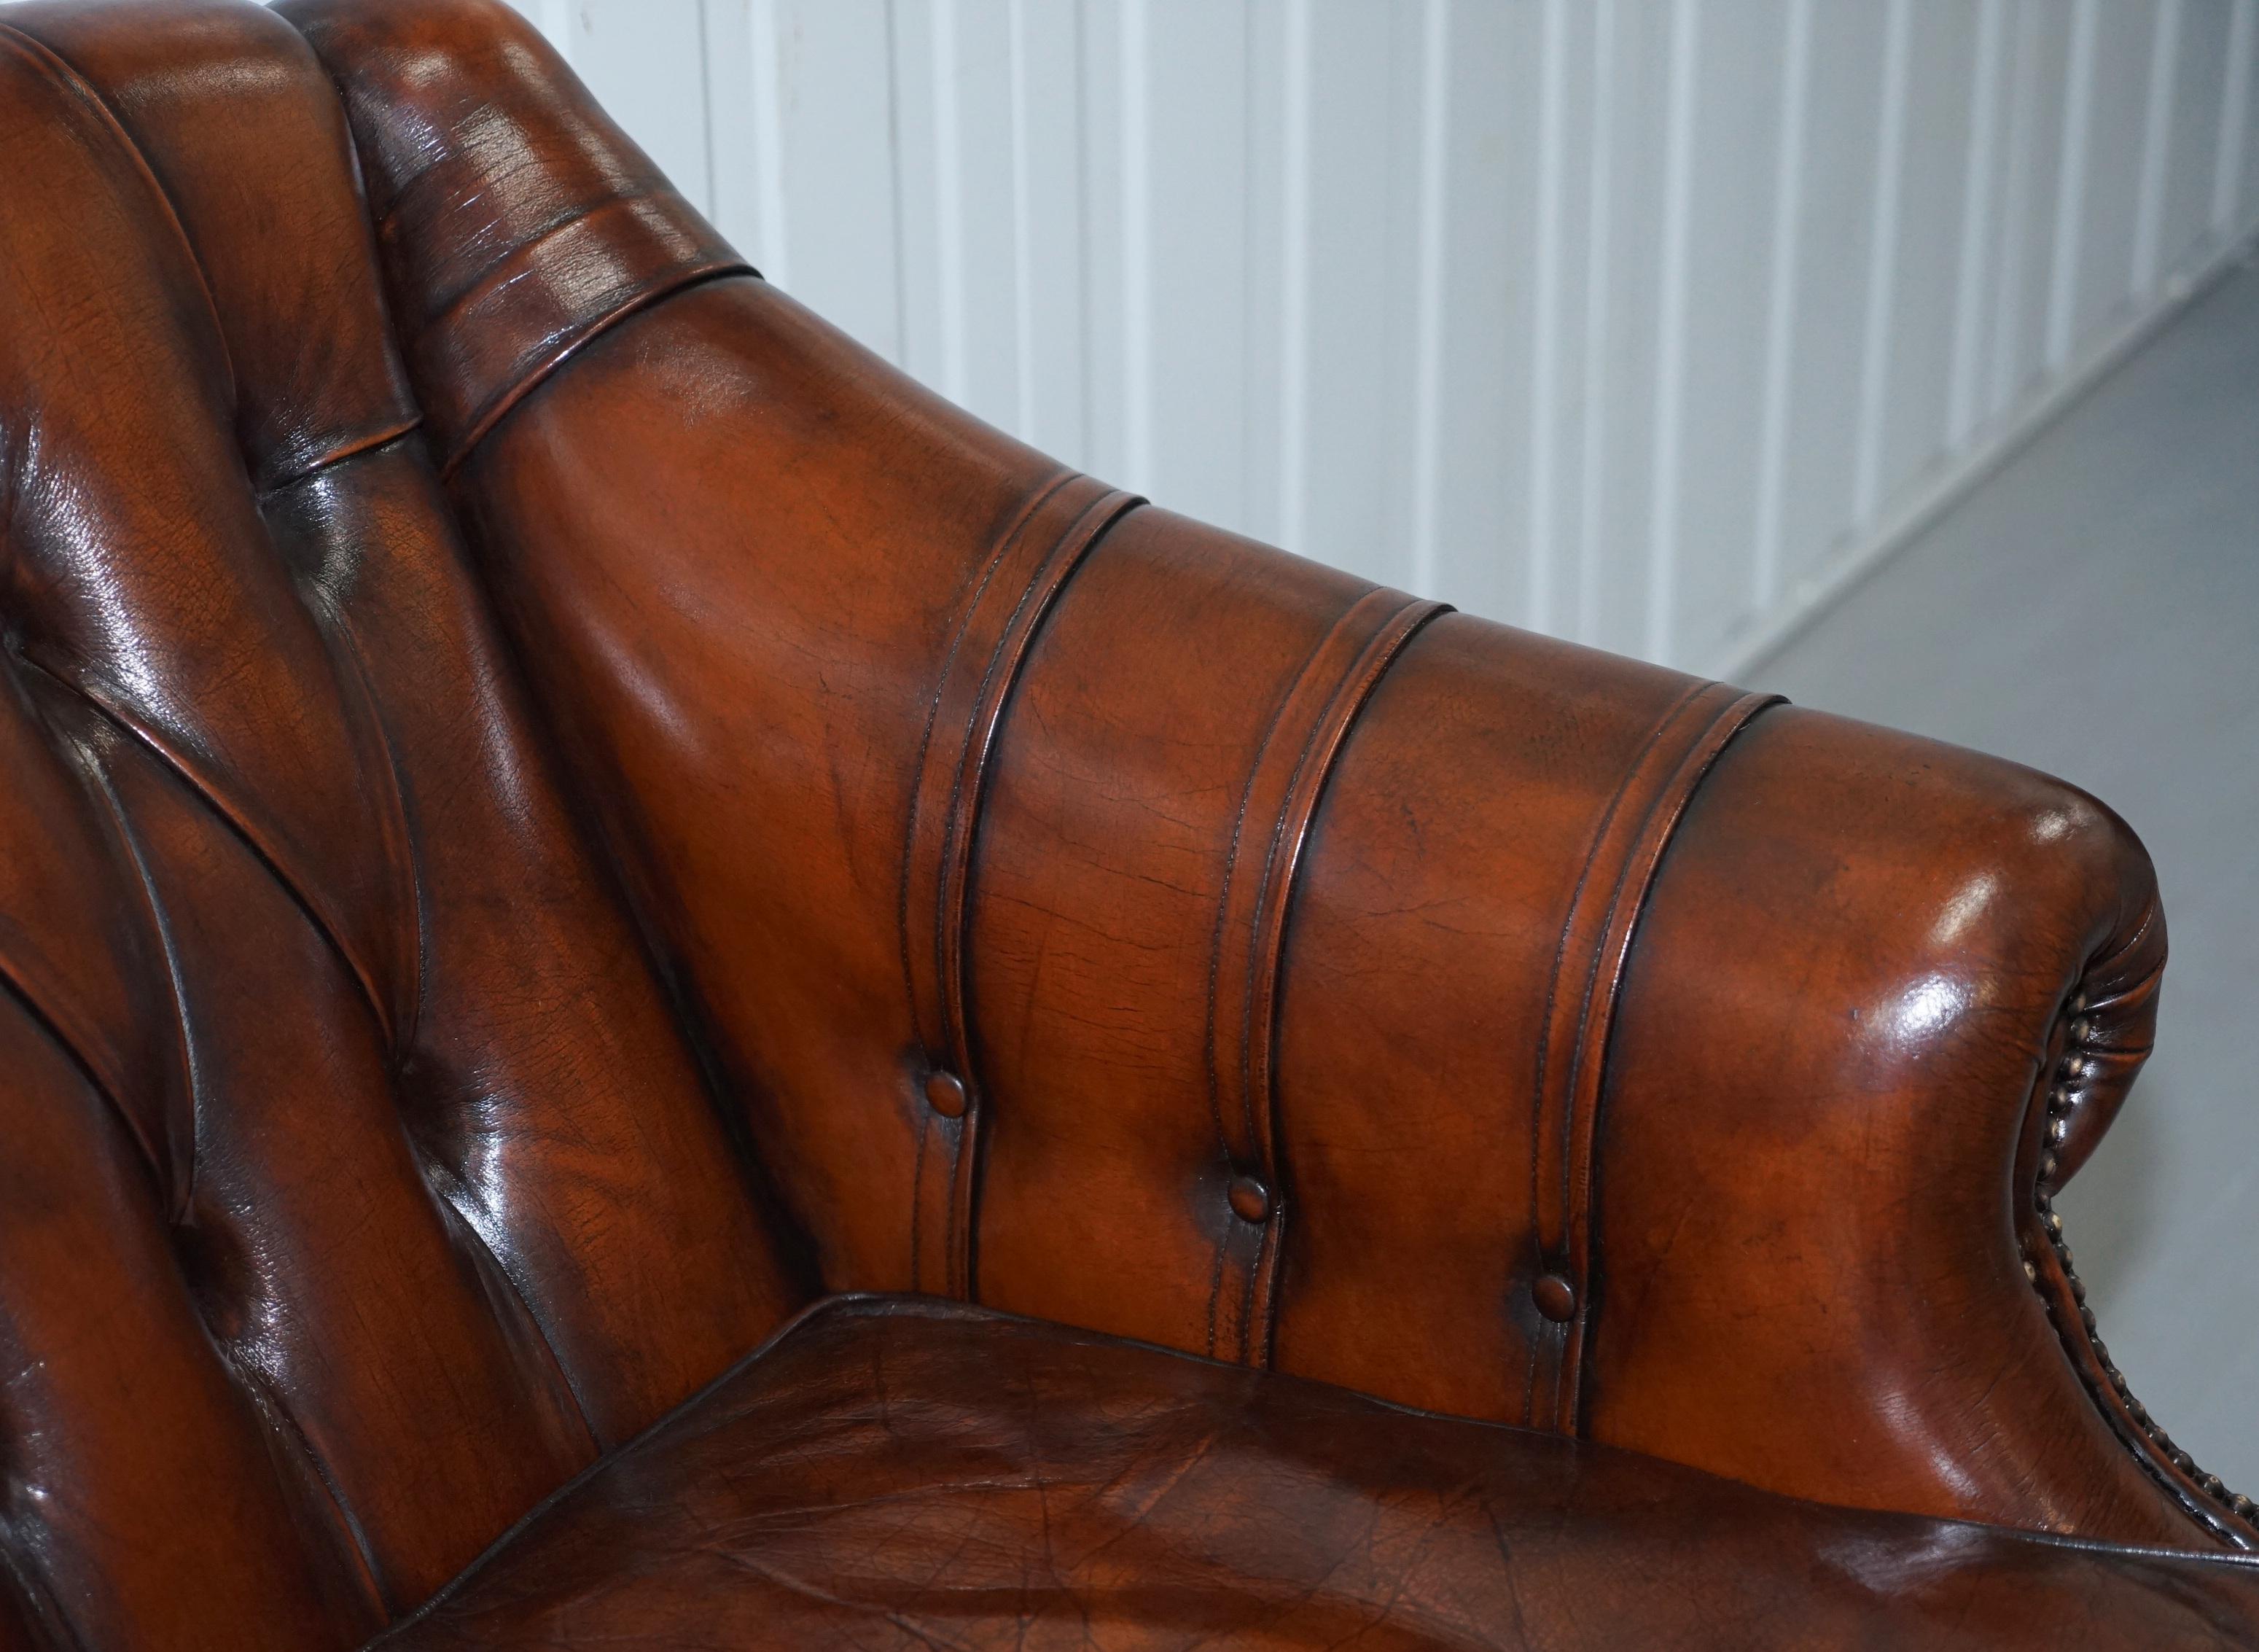 Pair of Restored Lutyen's Style Viceroy's Chesterfield Brown Leather Sofas 8